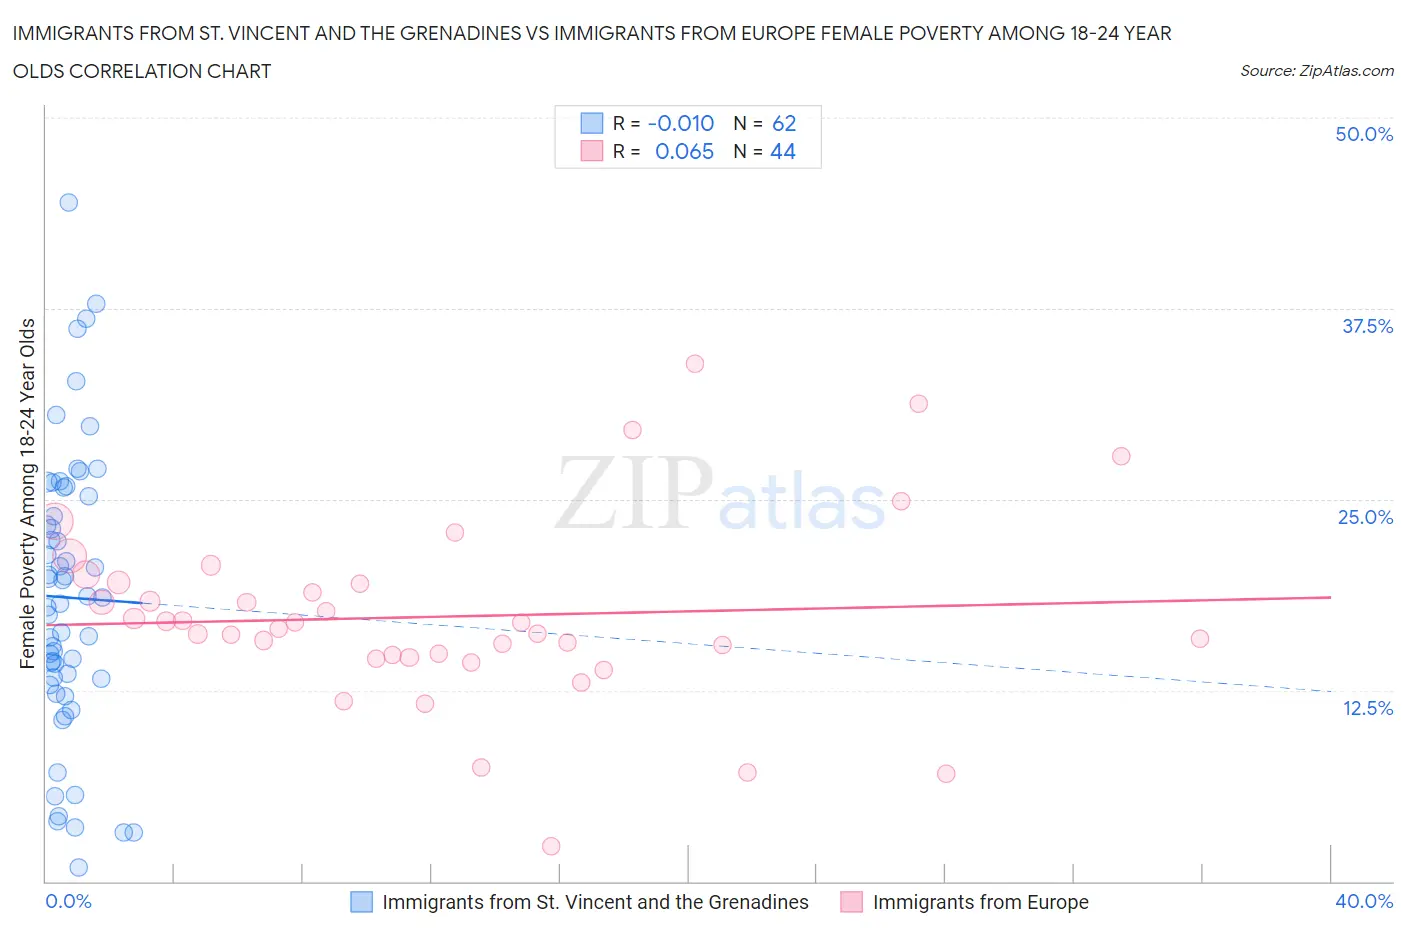 Immigrants from St. Vincent and the Grenadines vs Immigrants from Europe Female Poverty Among 18-24 Year Olds